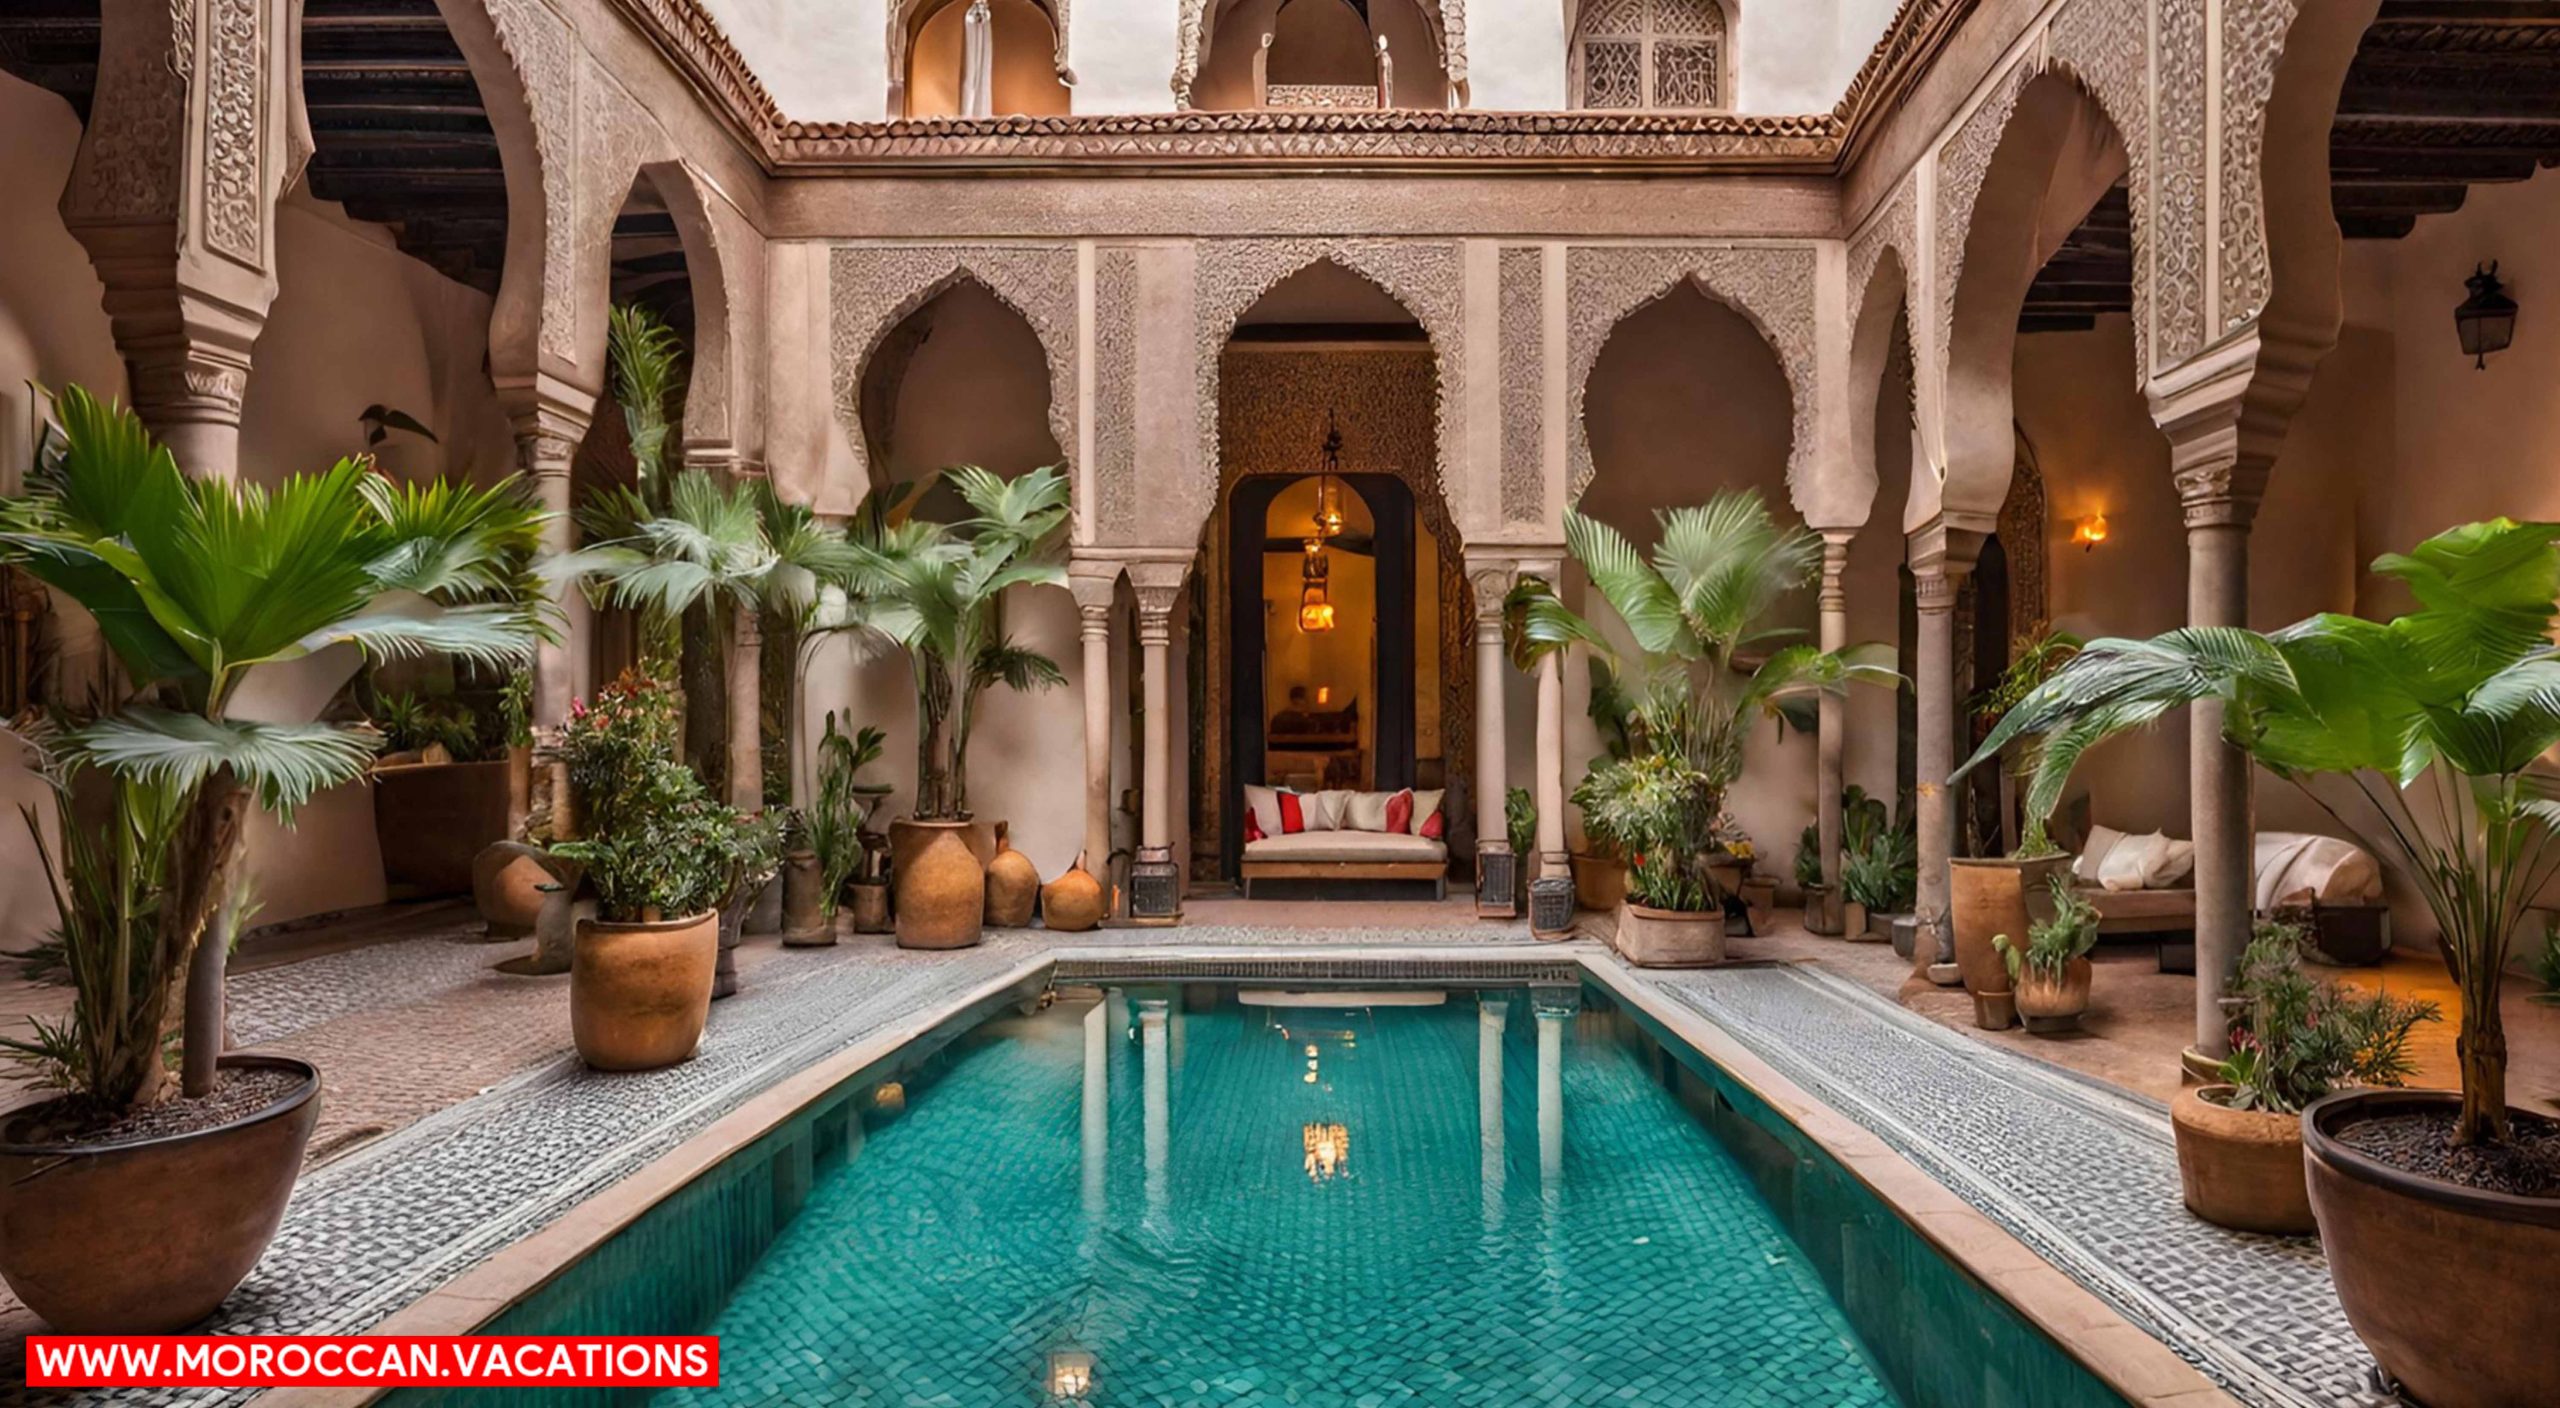 Riad courtyard in Marrakeck featuring a mosaic-tiled pool, lush palms, ornate arches.